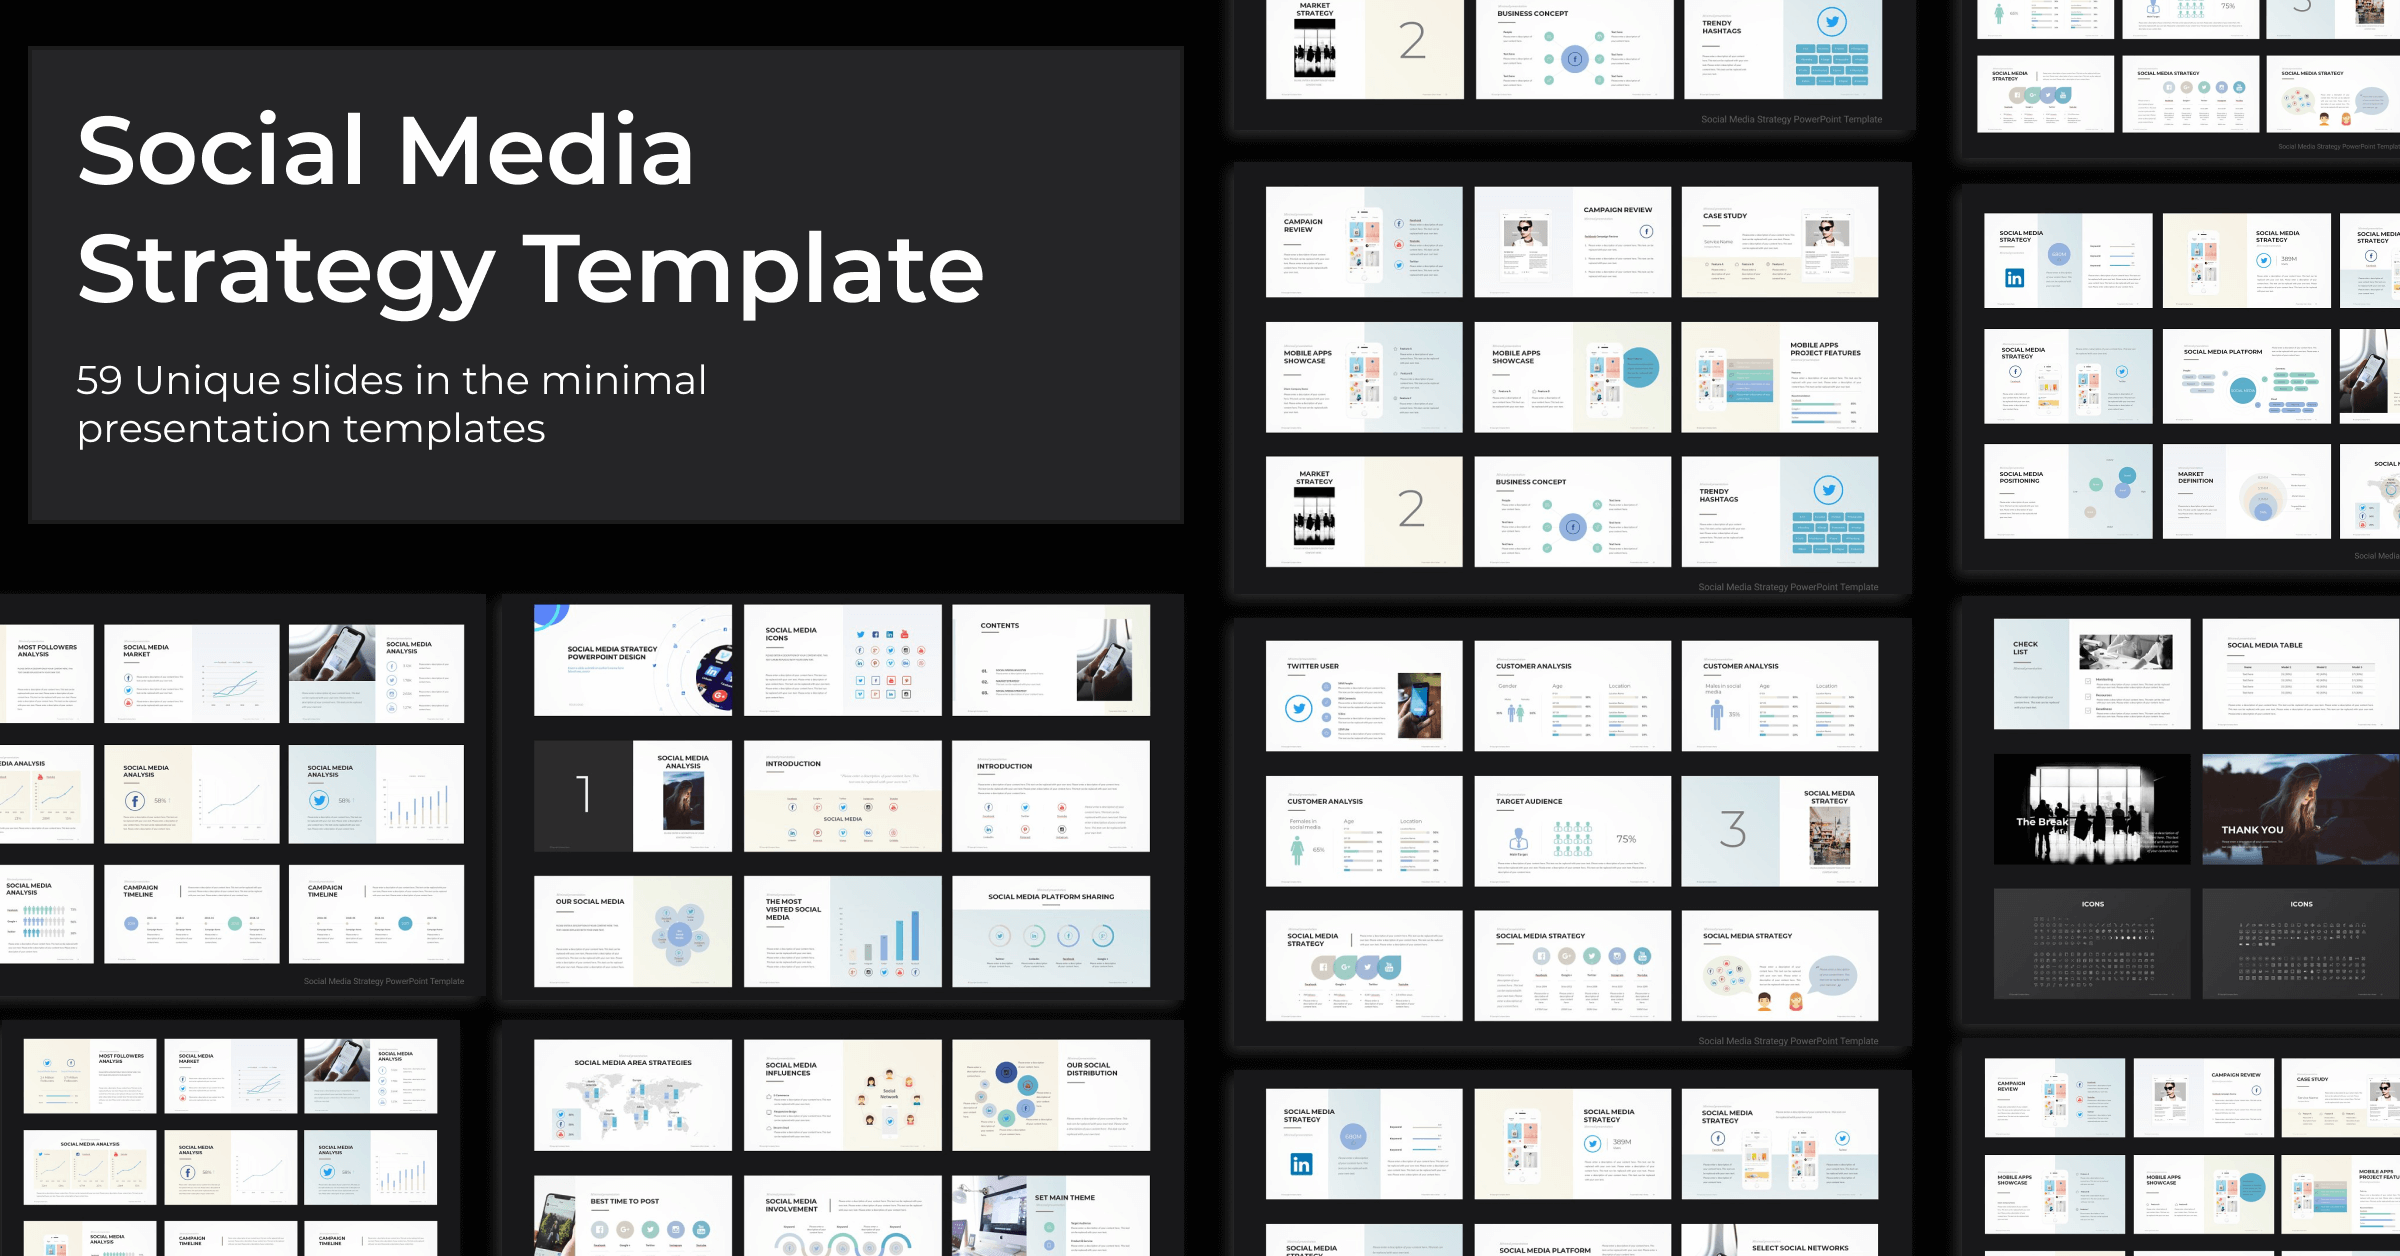 59 Slides of Social Media Strategy Template.